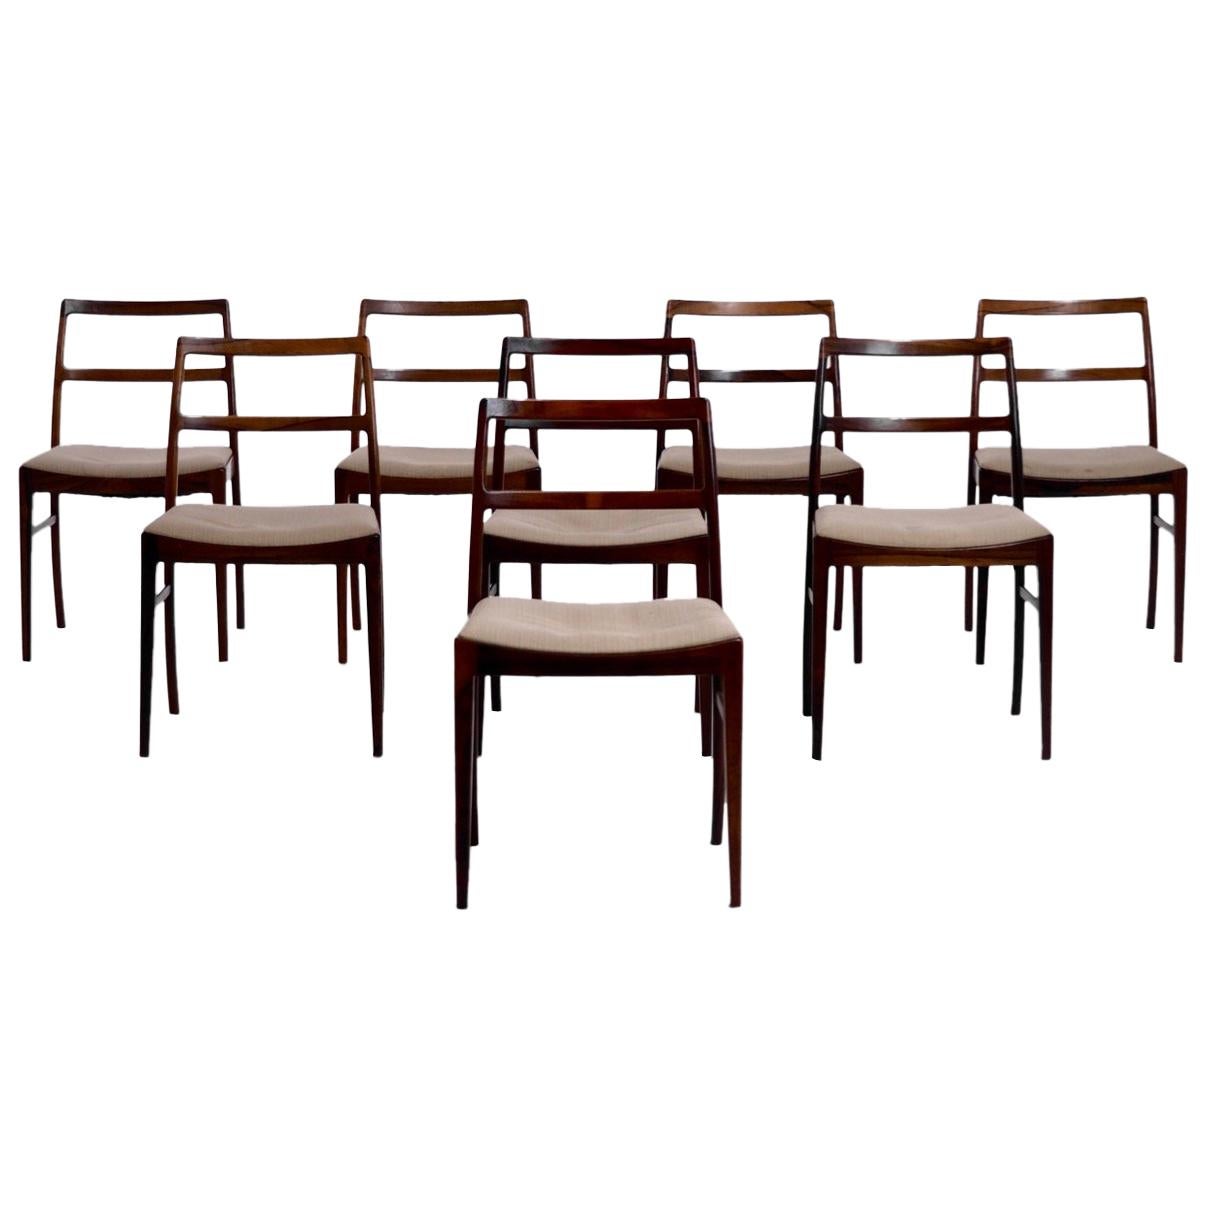 Set of 8 Chairs in Rosewood by Arne Vodder, Model 430